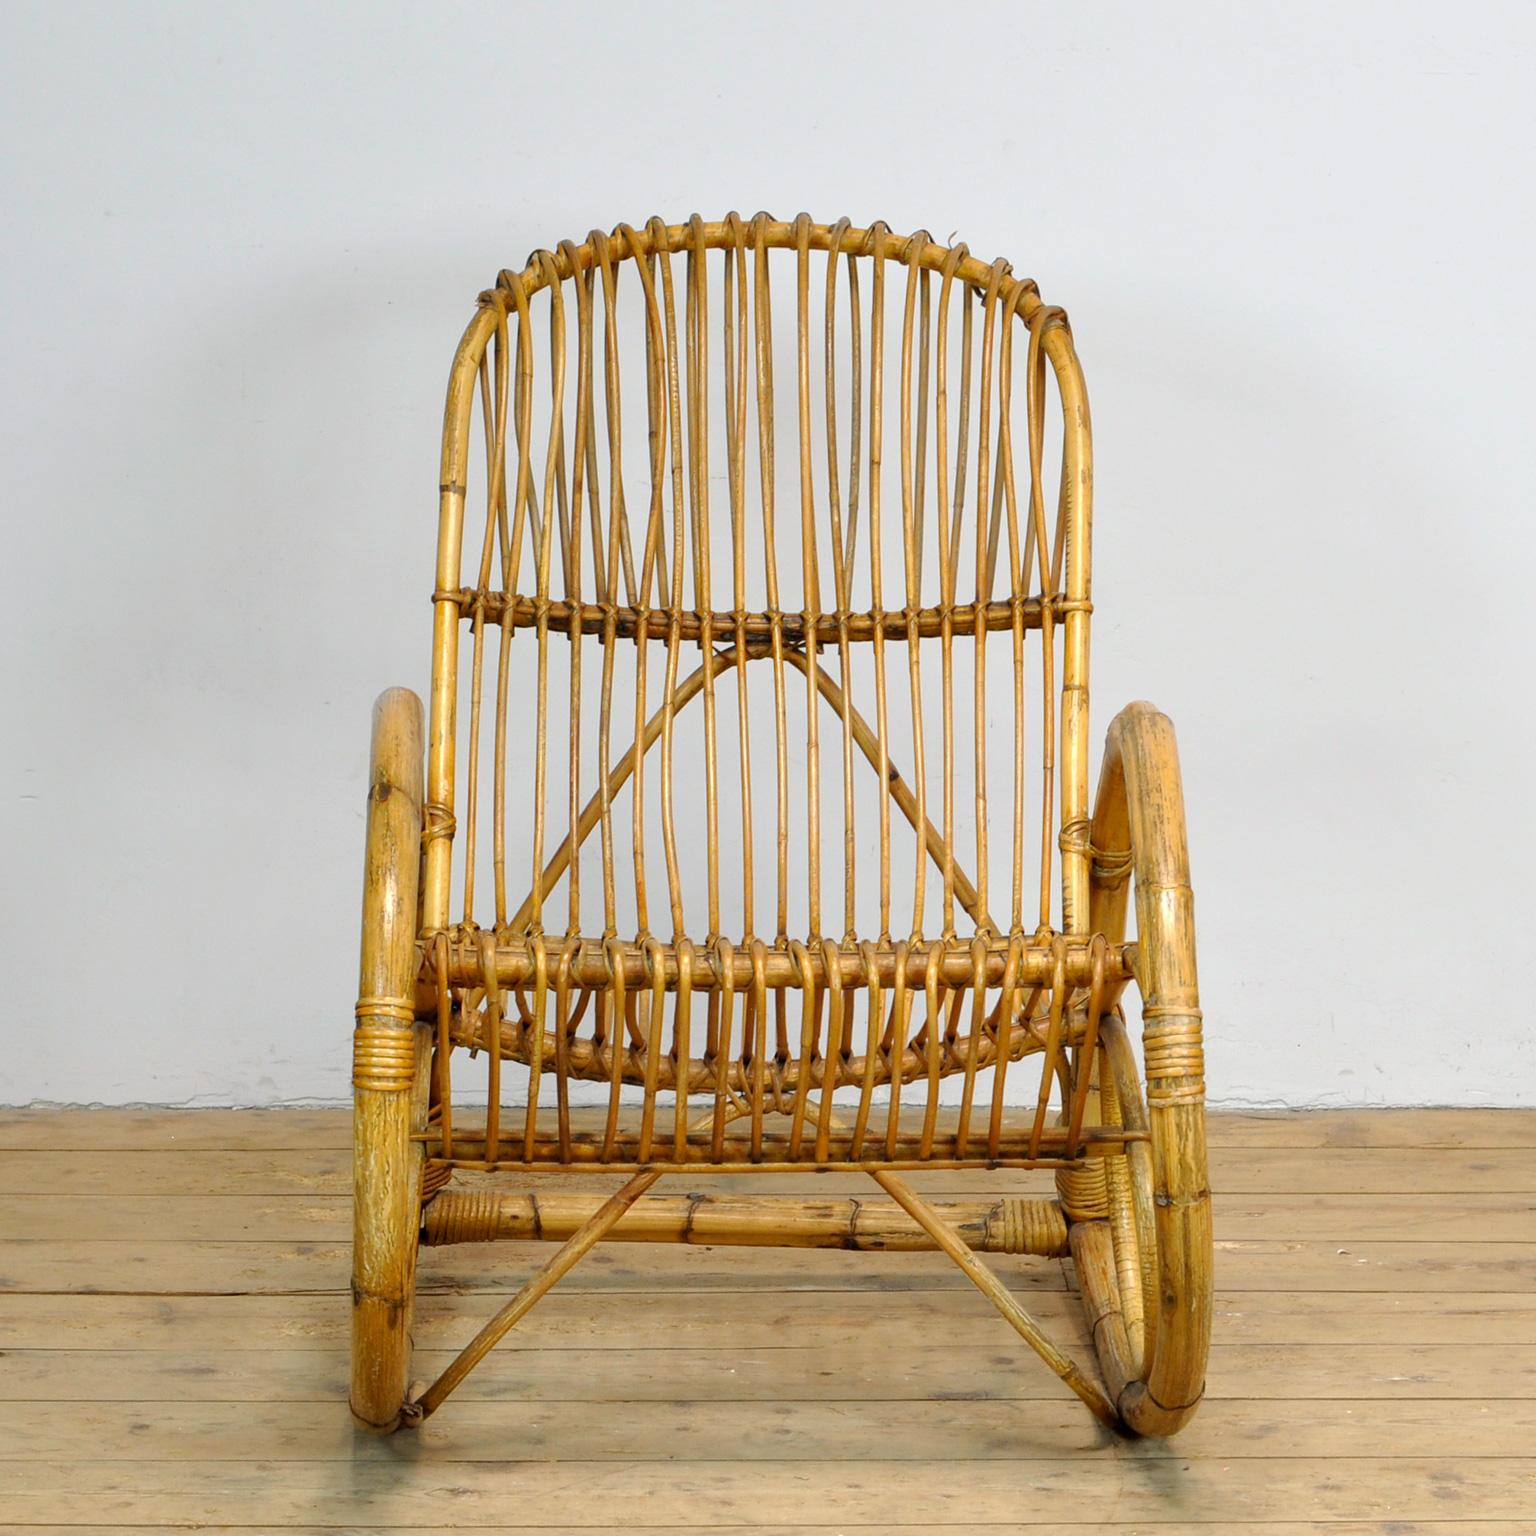 Rattan rocking chair made by Rohé Noordwolde in the 1960s. The chair has beautiful round shapes. The open character of this chair also gives a spatial effect.